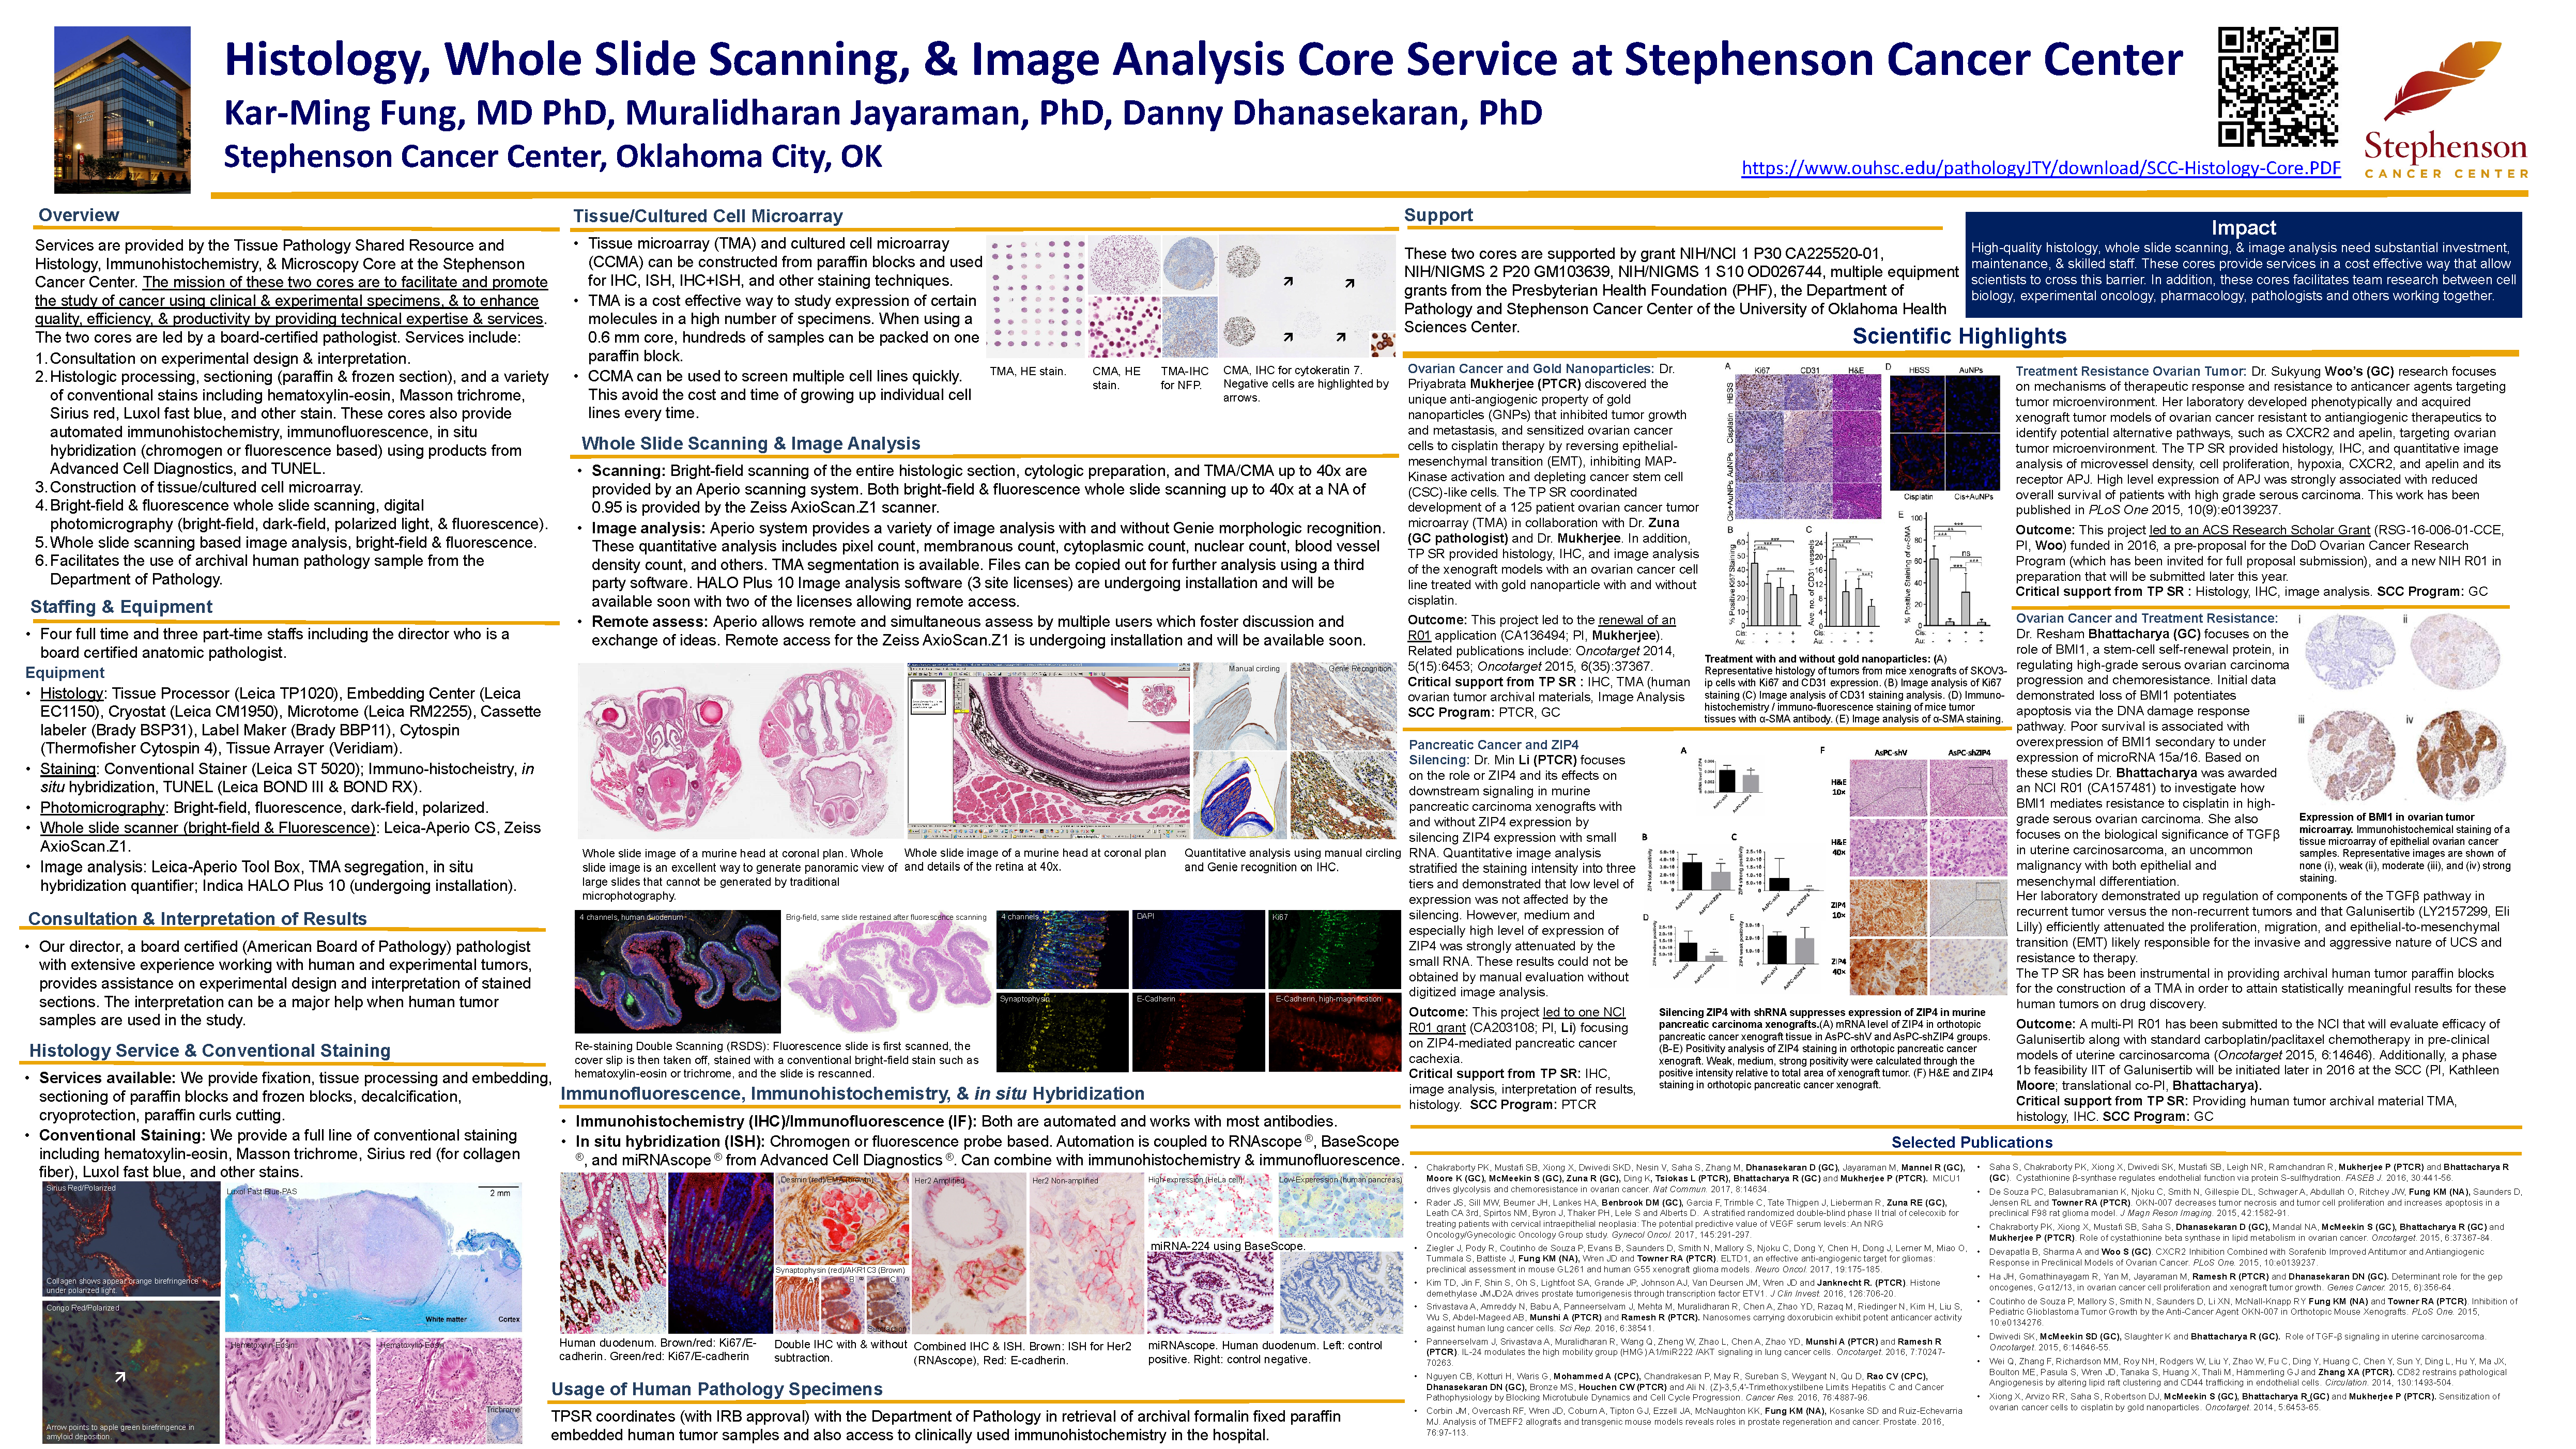 Histology Services at Stephenson Cancer Center